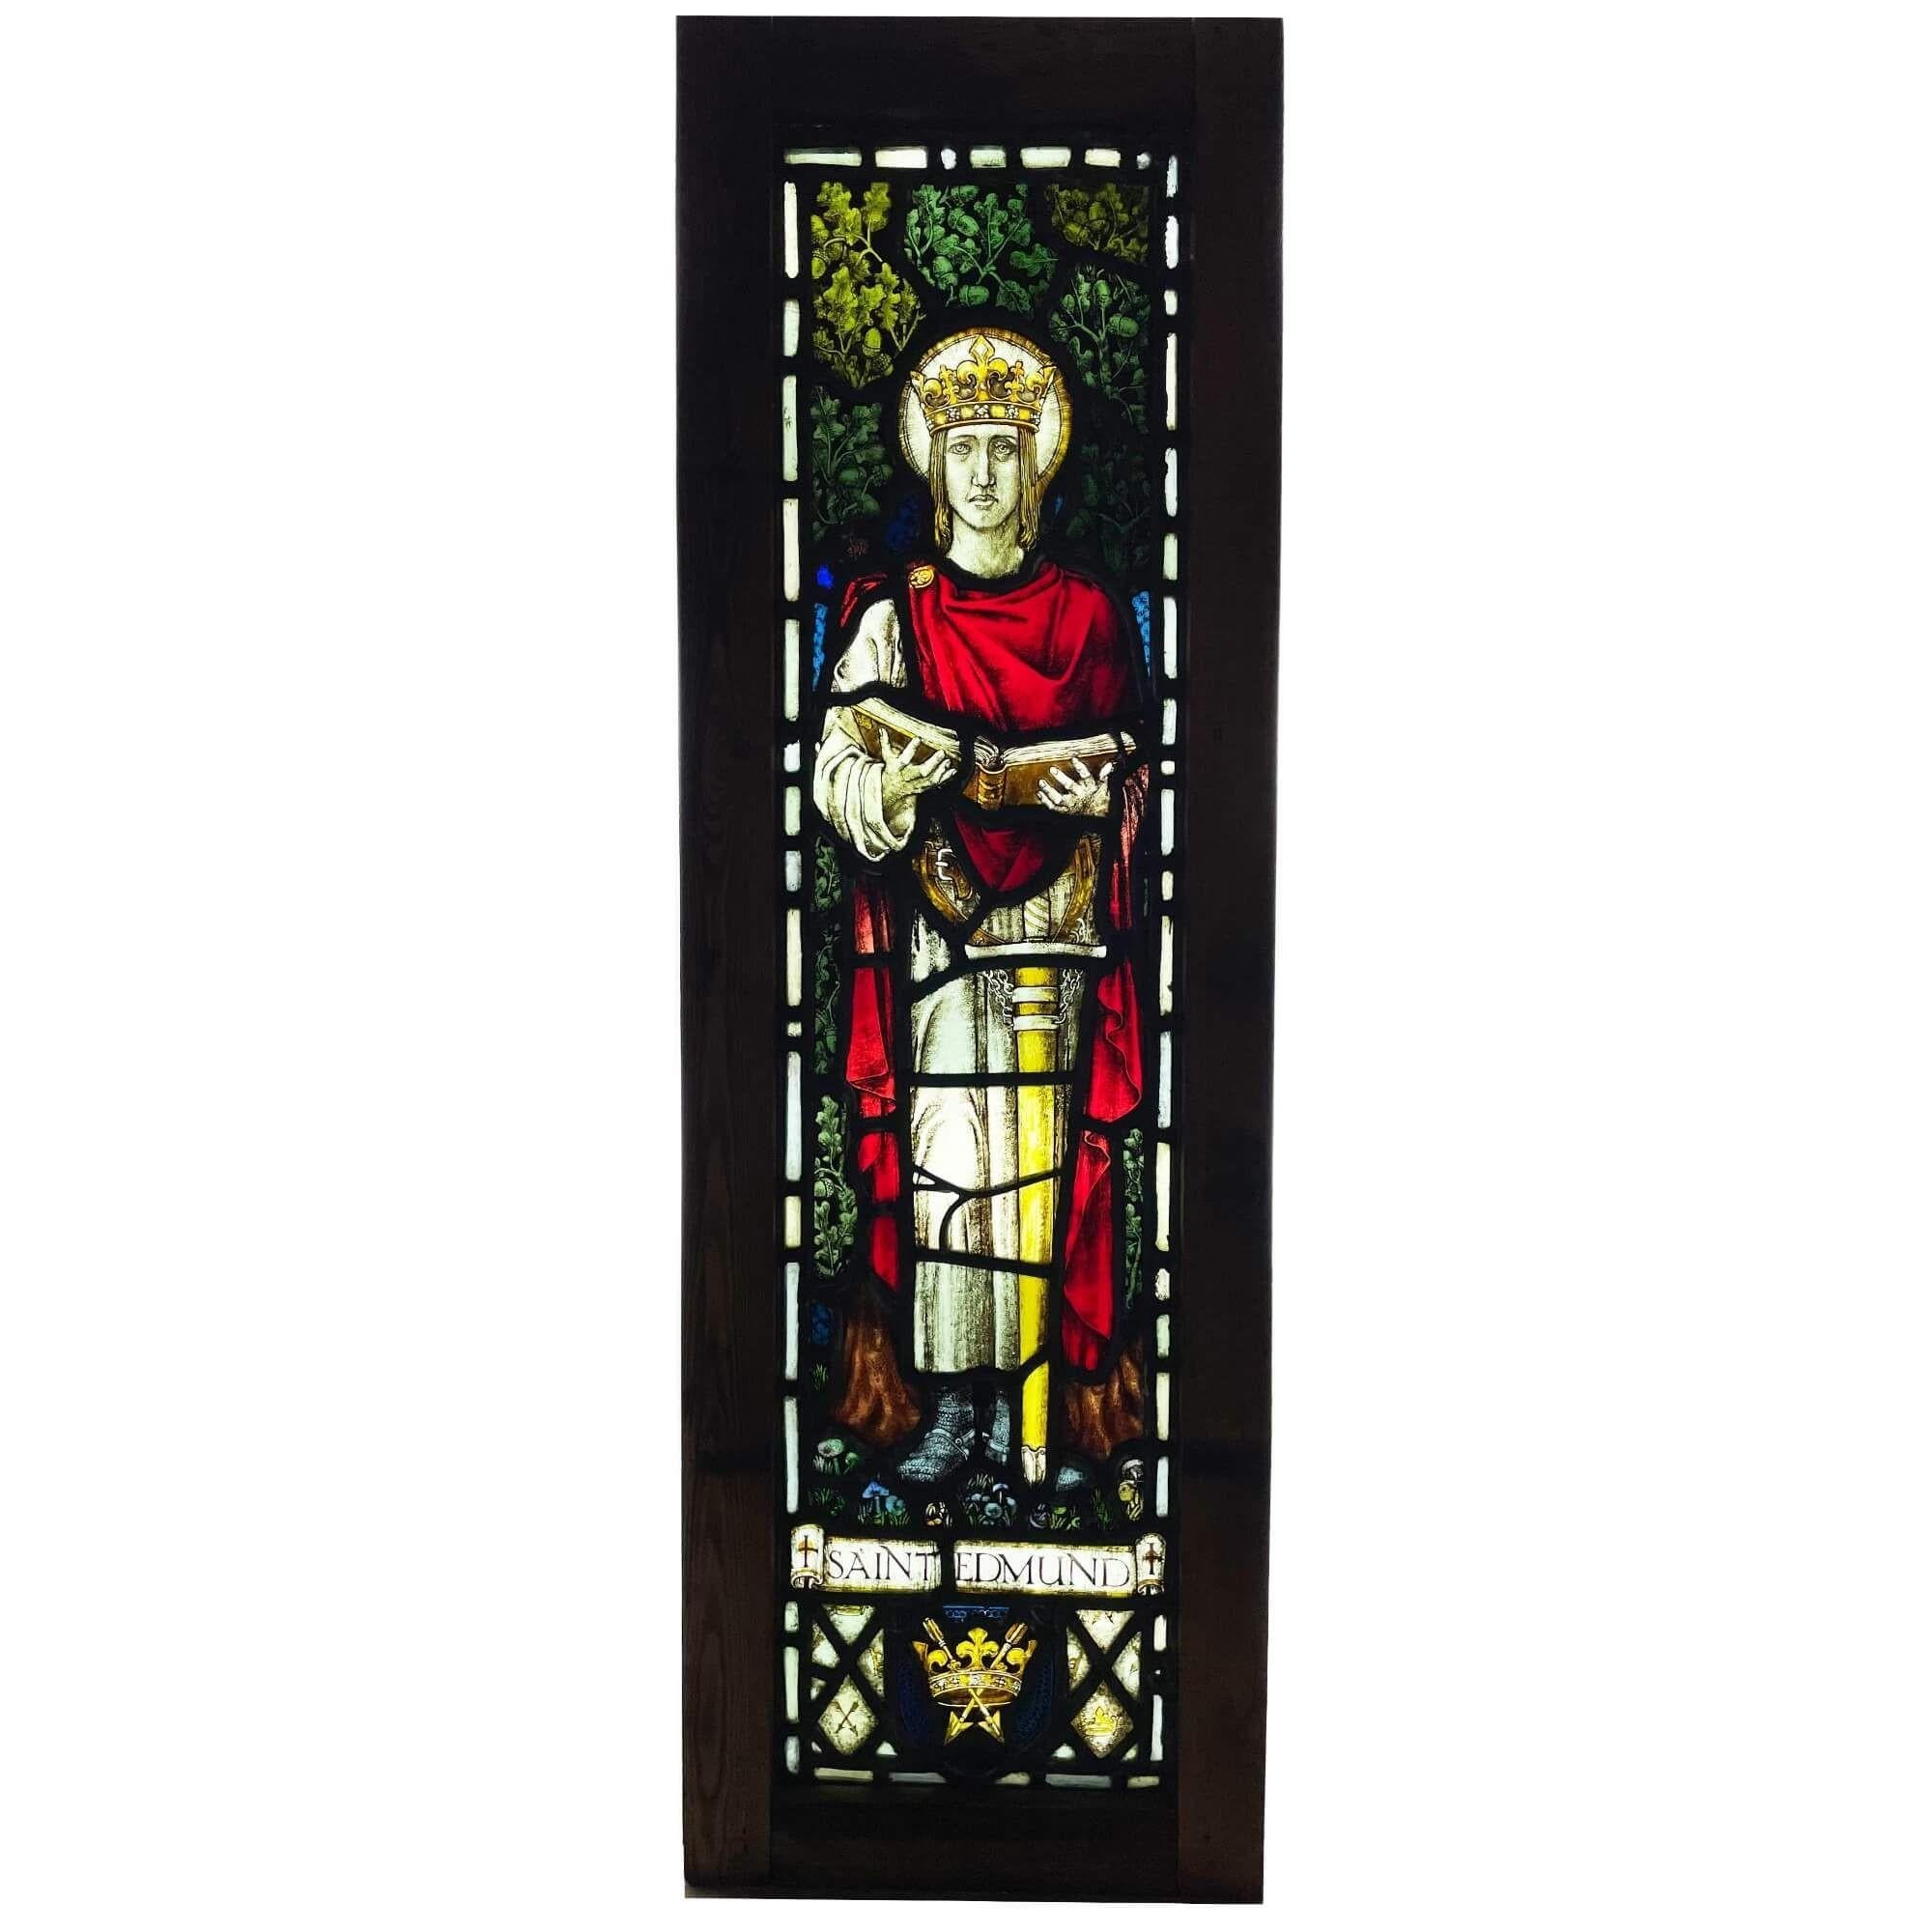 An antique ecclesiastical stained glass window of Saint Edmund reclaimed from Beeleigh Abbey. This dramatic stained glass window reads 'Saint Edmund’ on a religious scroll. Competently painted, this window is a stunning and detailed interior feature